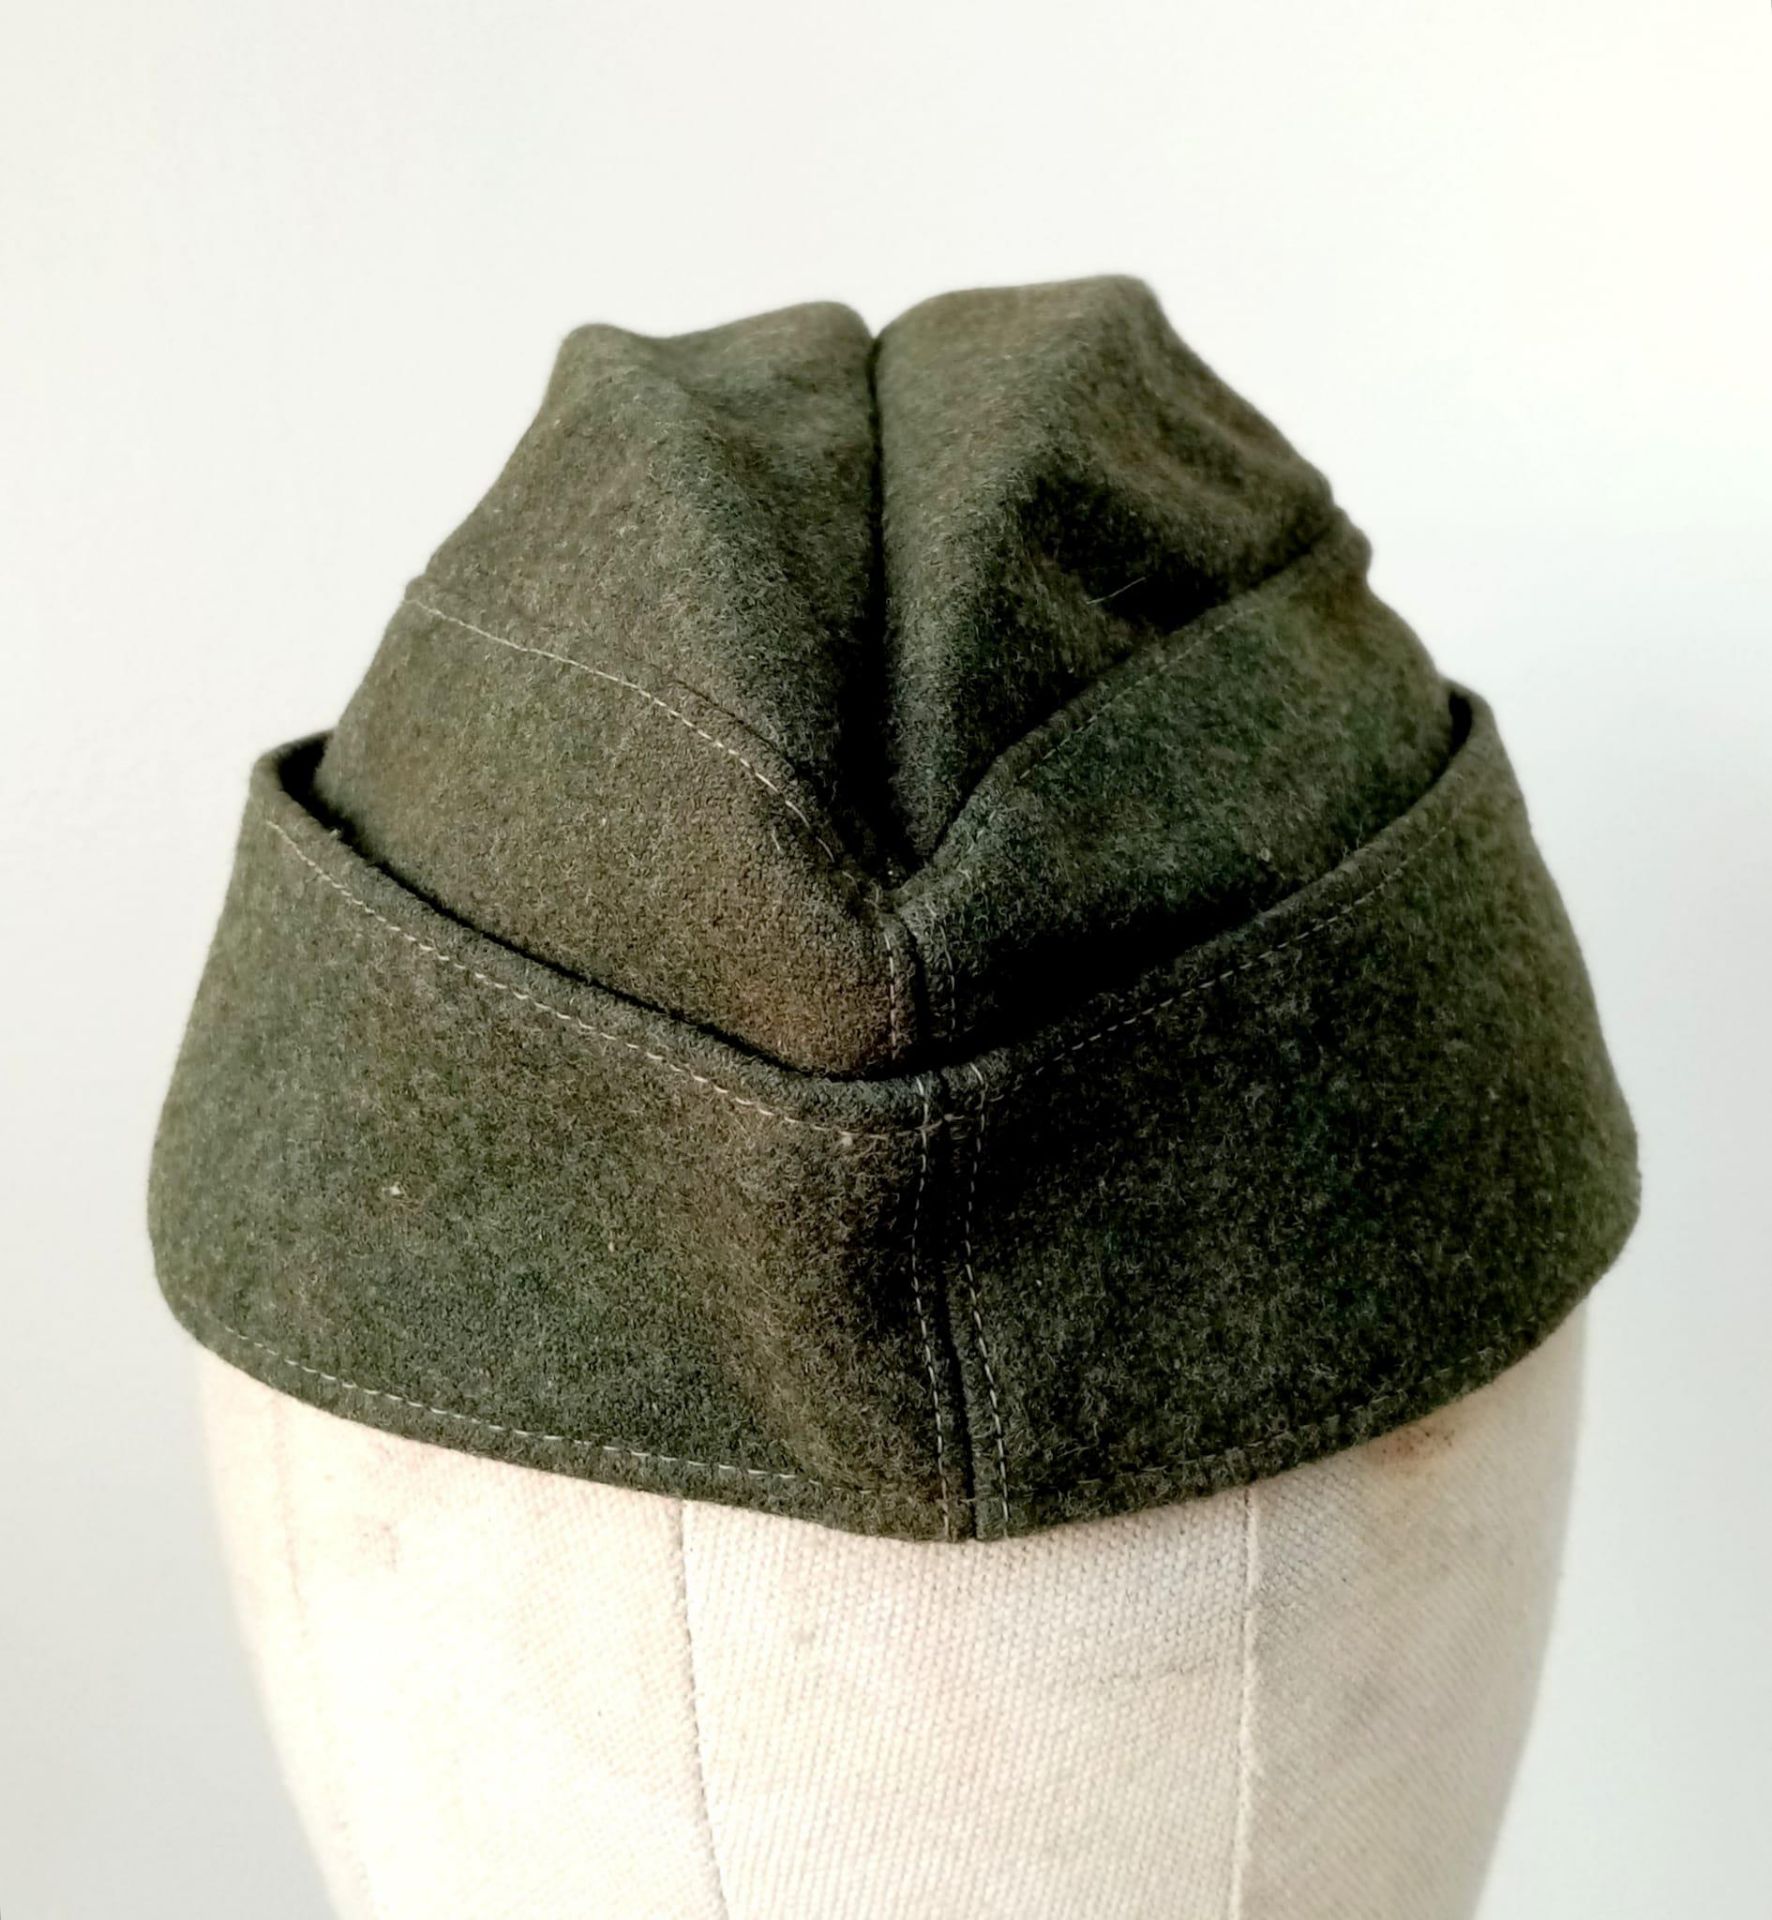 WW2 German Heer (Army) M34 Overseas Side Cap. Good condition for its age. - Image 7 of 11